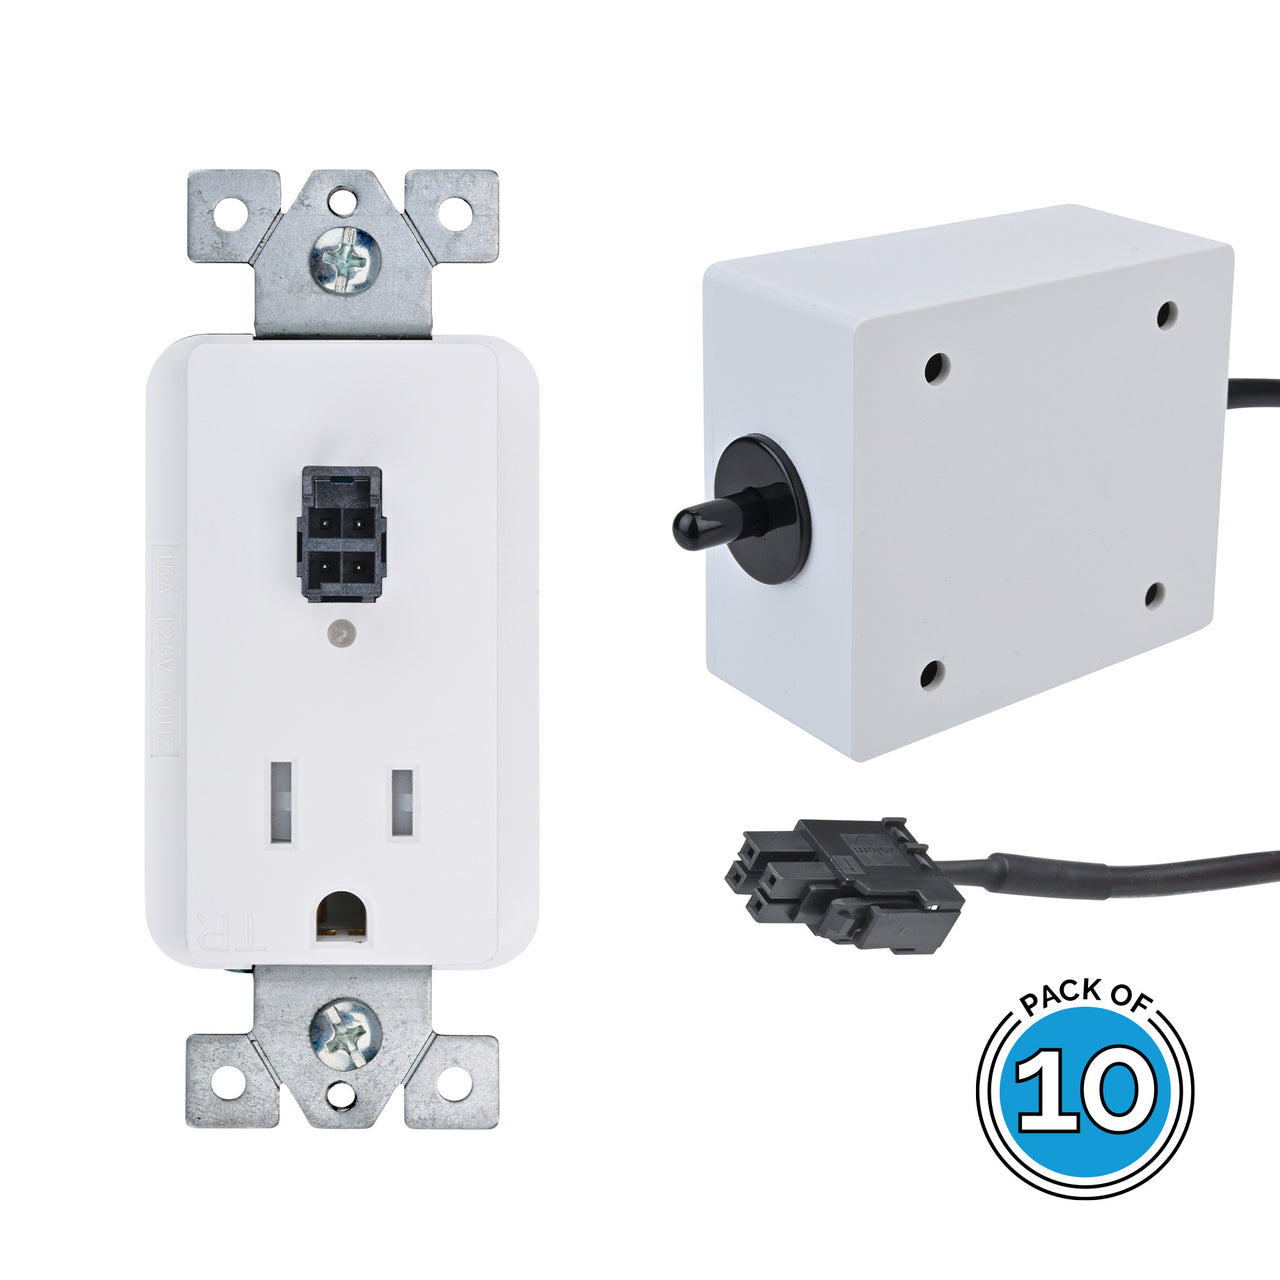 Get in Control of Plug Loads and Receptacles > Green > Leviton Blog